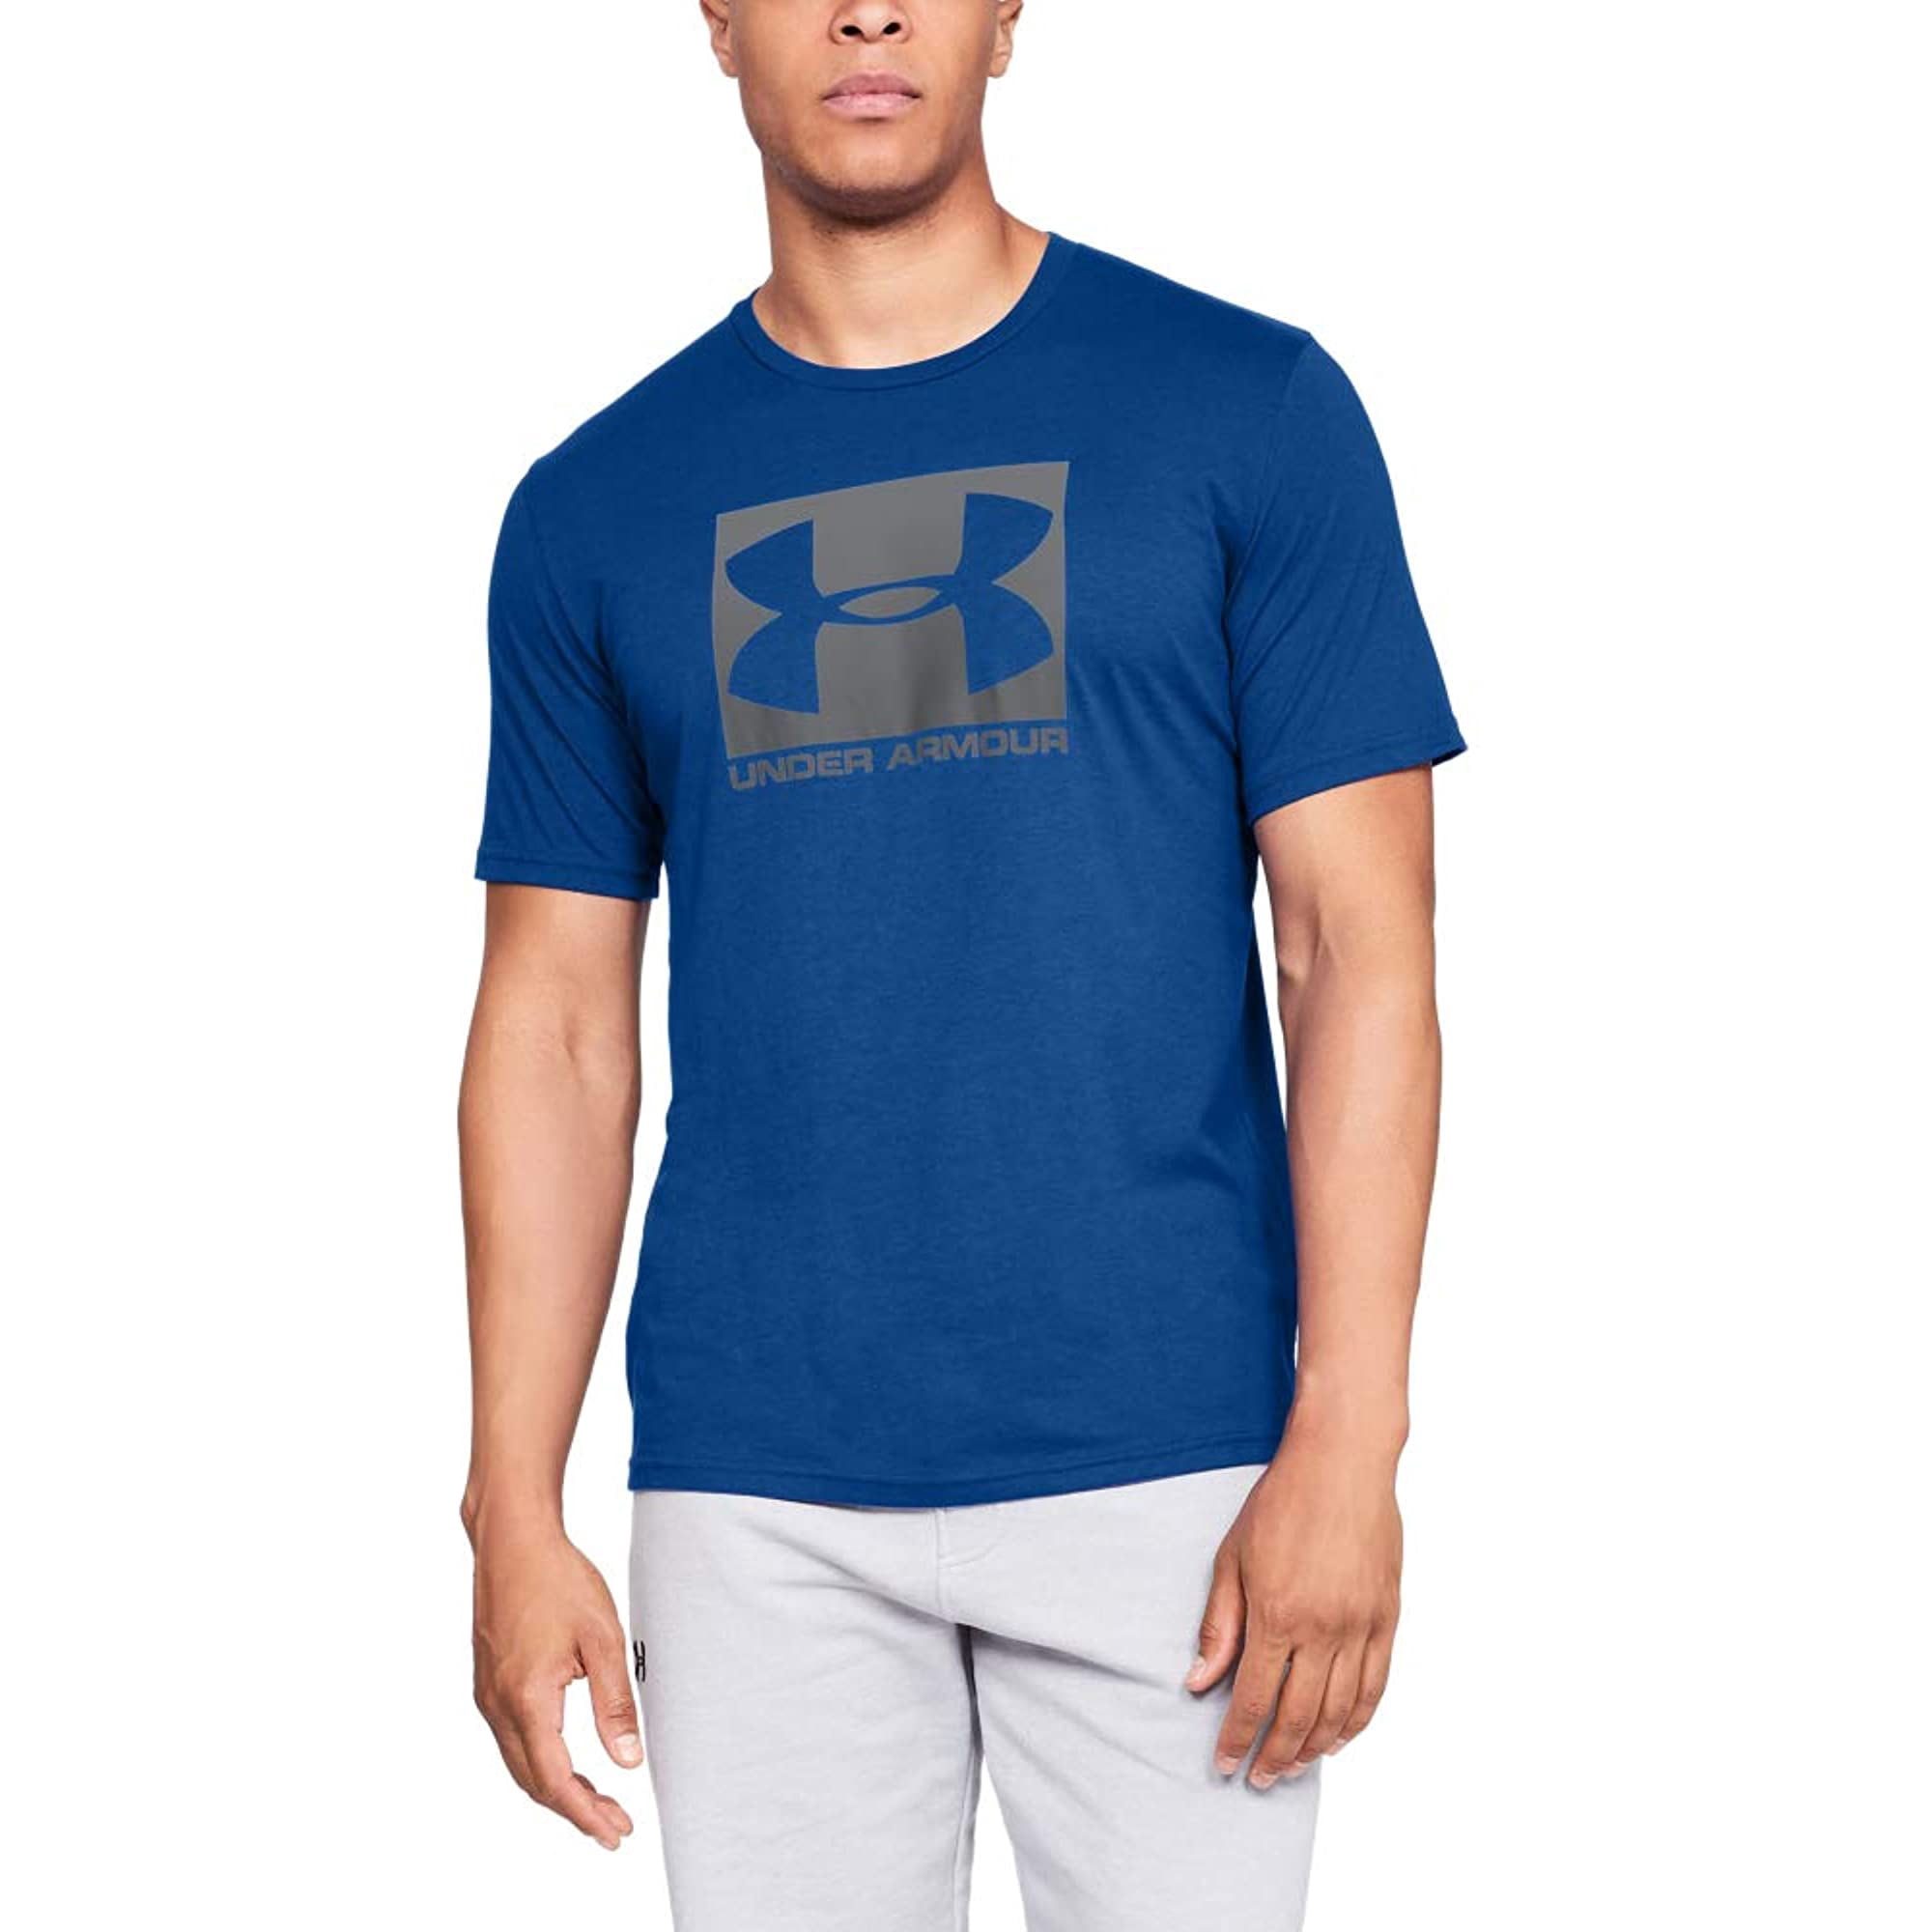 Under Armour Mens Boxed Sportstyle T-Shirt